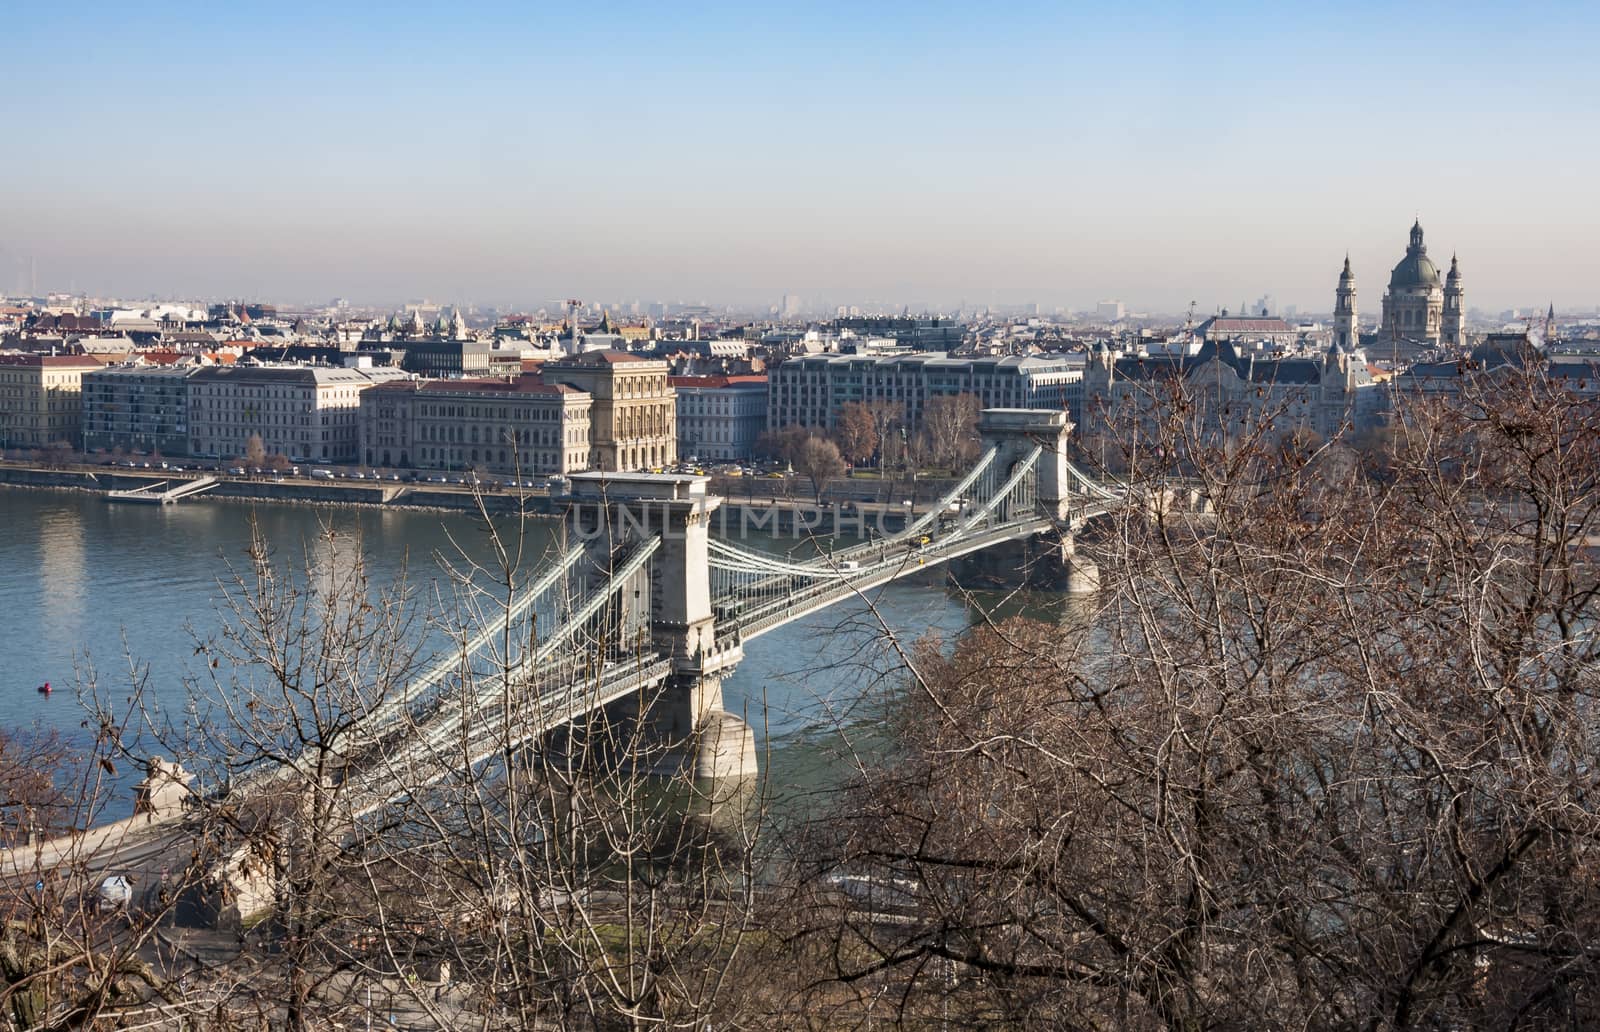 panoramic view of the Danube River and the city of Budapest, Hungary